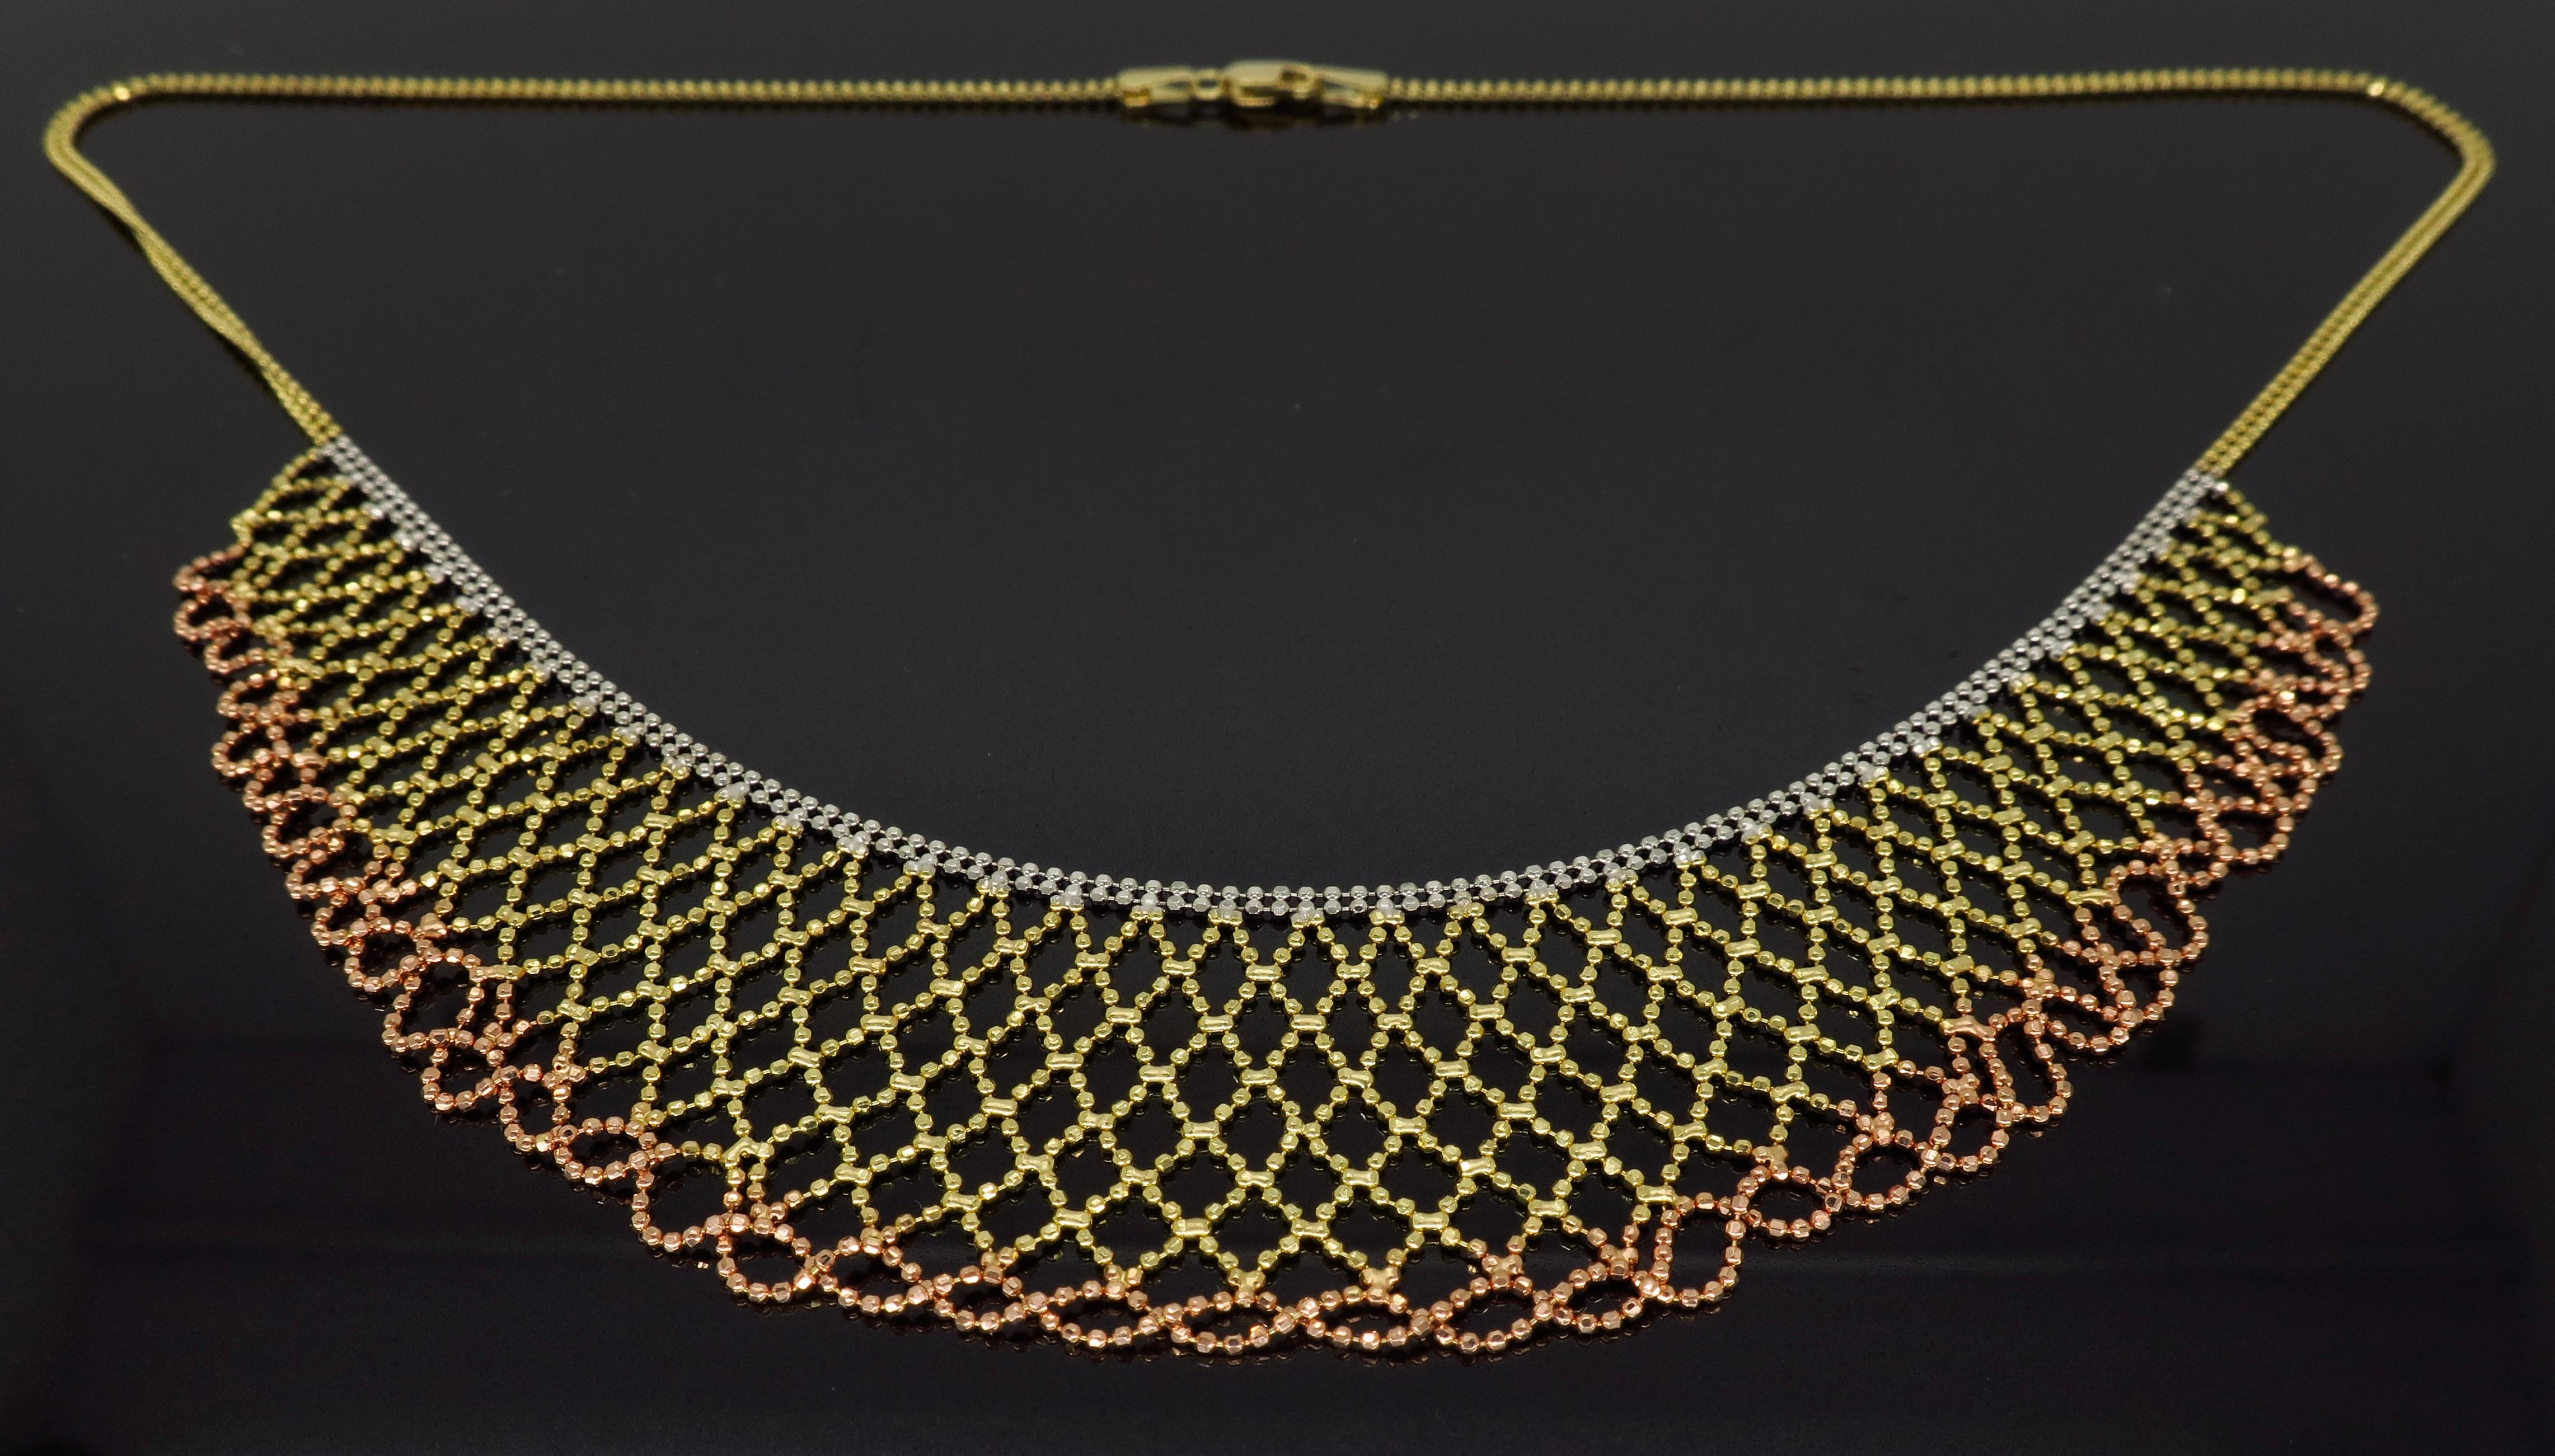 Unique collar style 14K tri-color gold necklace measuring approximately 17” in necklace length with the longest drop length being approximately 1.25” and weighing 10.2 grams. 
